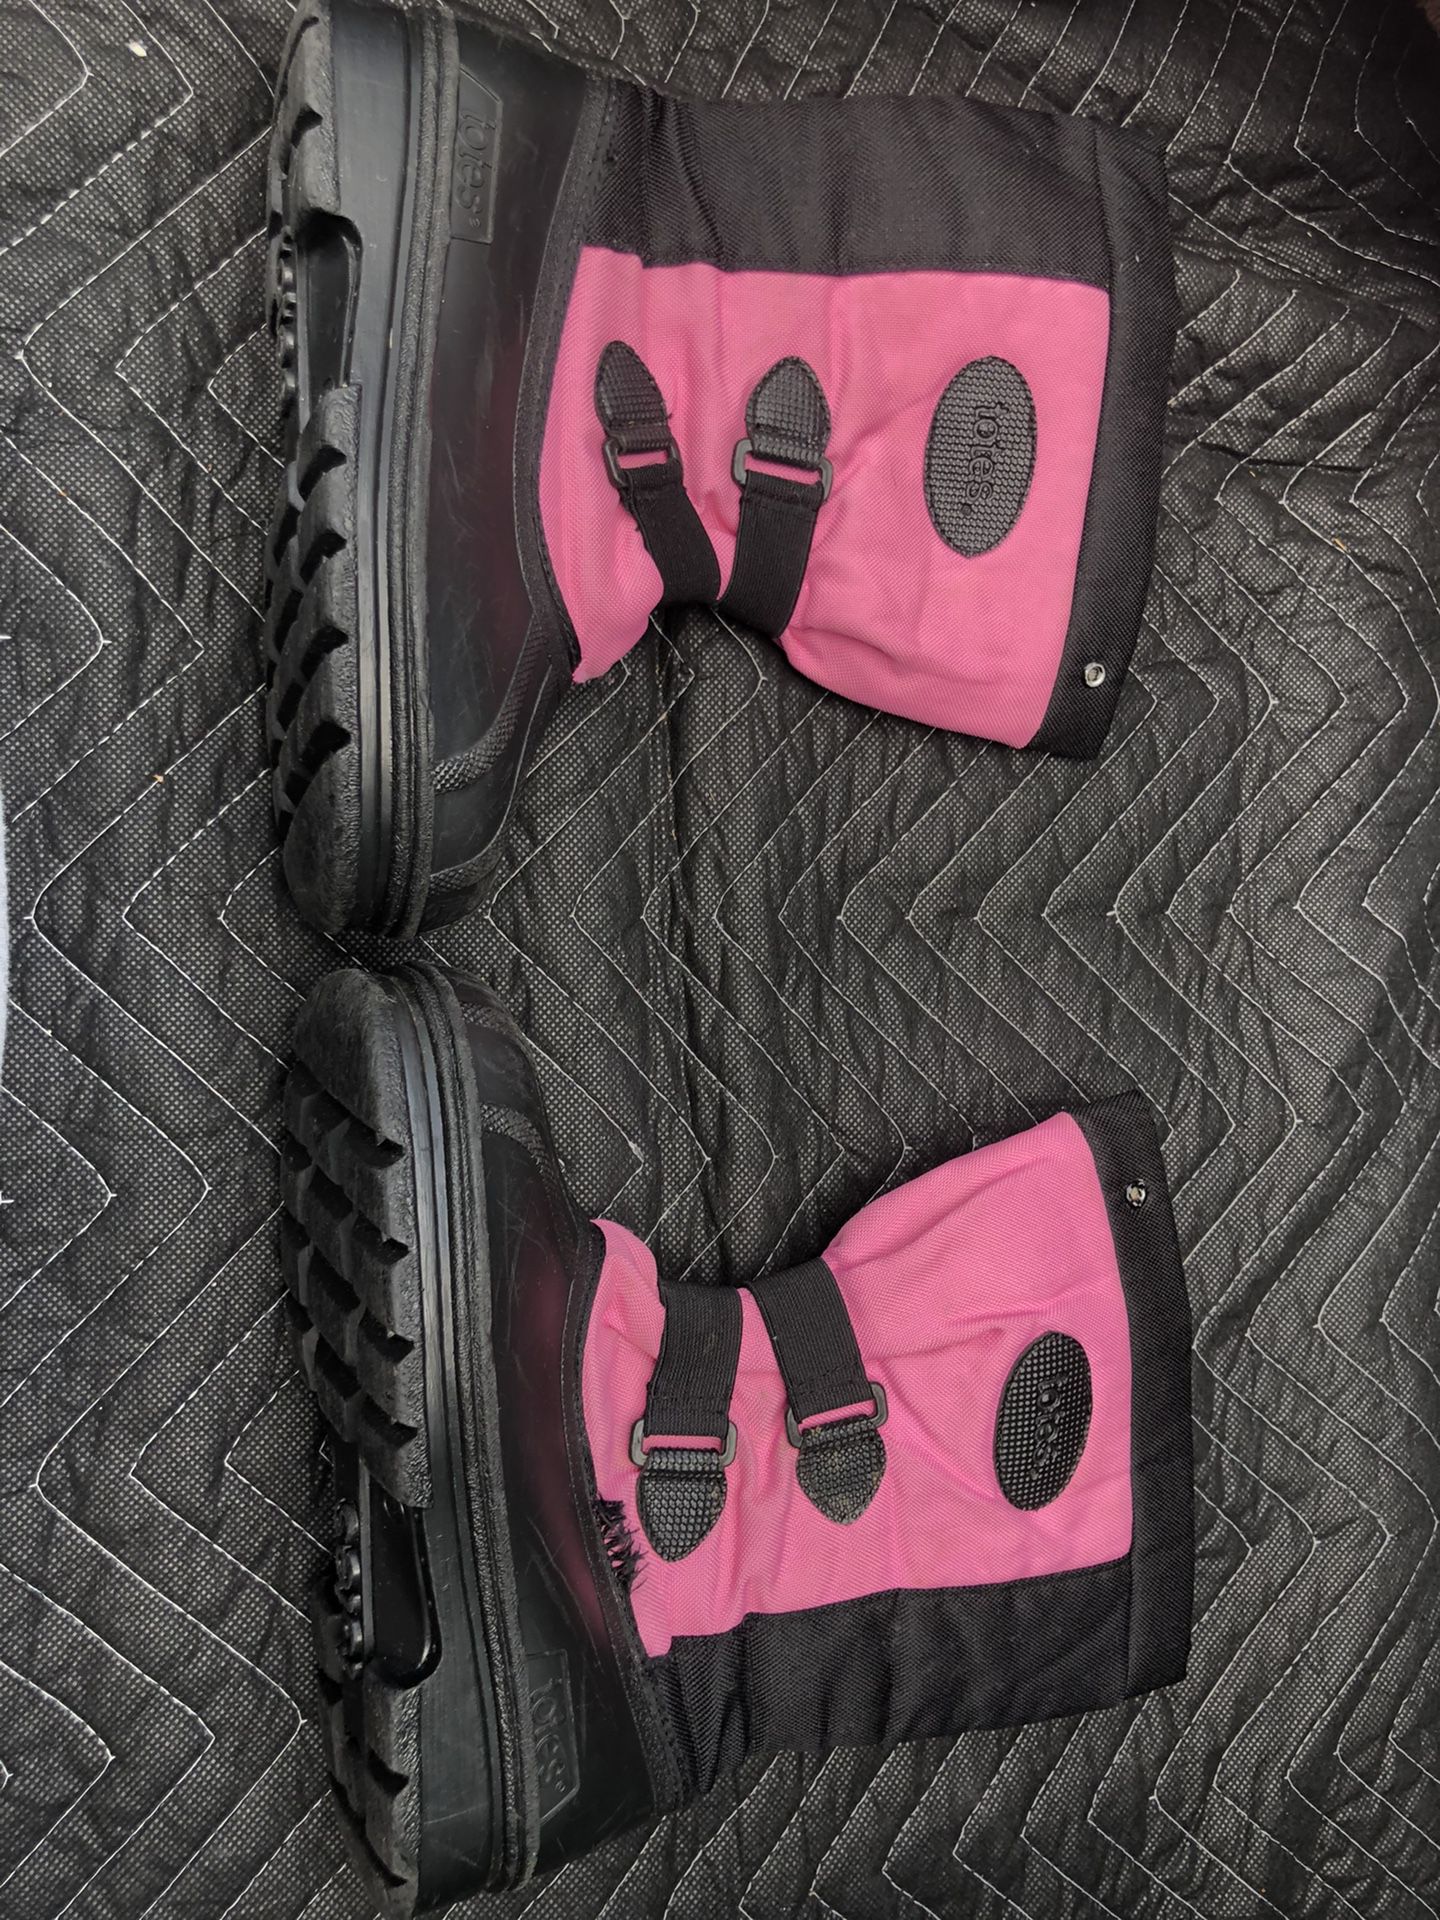 Totes, Snow Winter Boots, Pink & Black, girl’s size 4